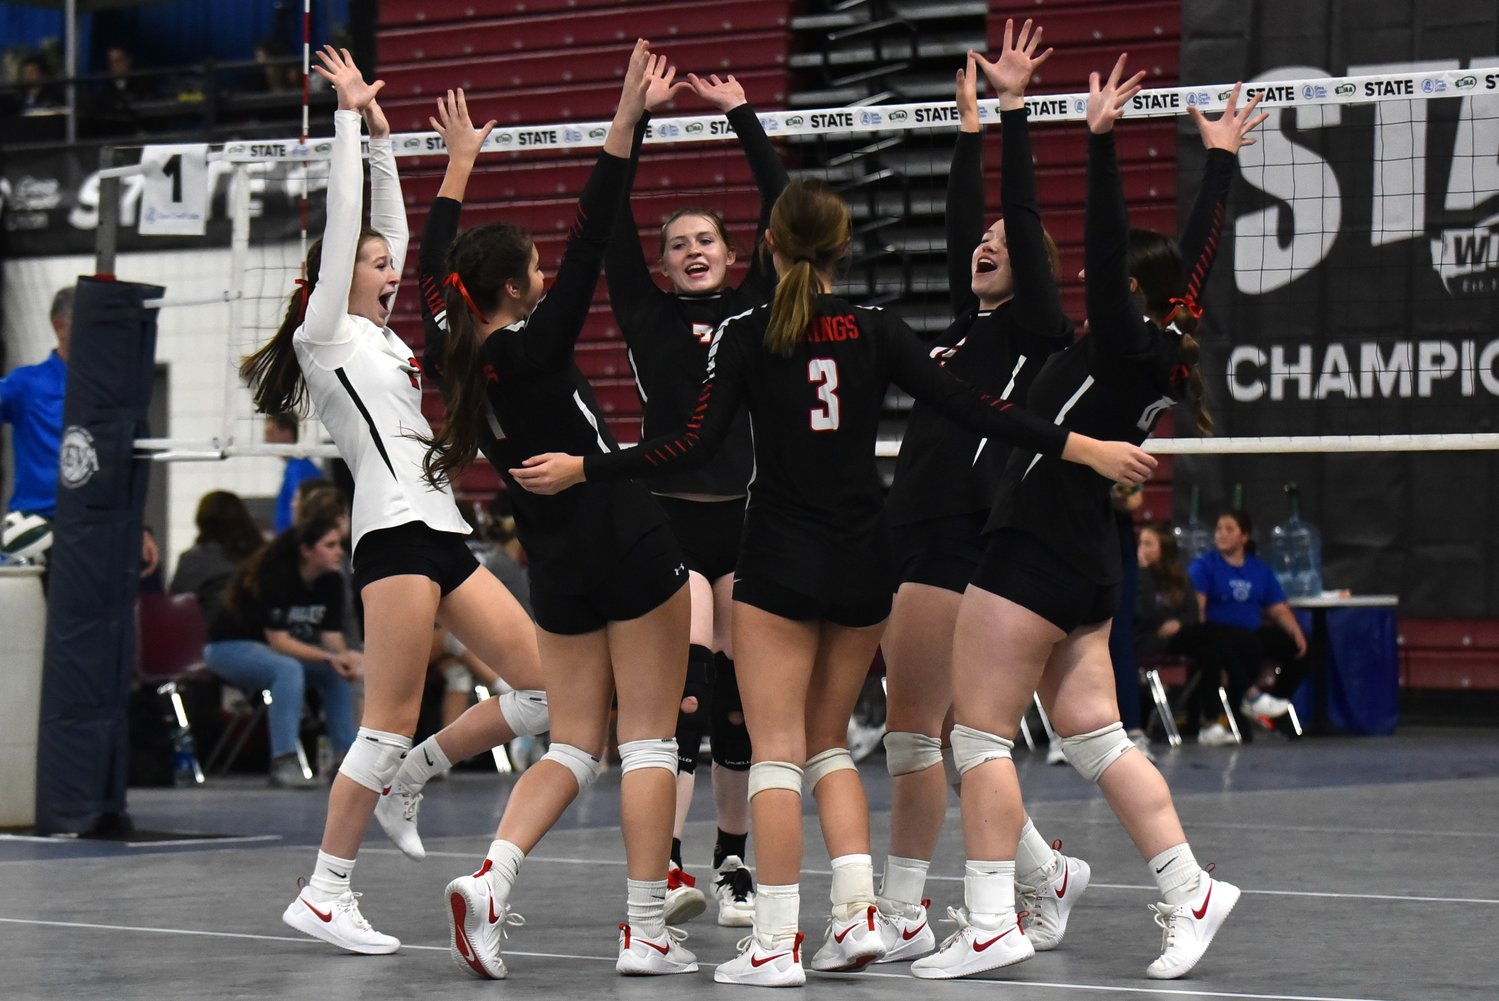 The Mossyrock volleyball team celebrates a point during the first set of its first-round sweep of Grace Academy at the 1B state volleyball tournament, Nov. 10 in Yakima.